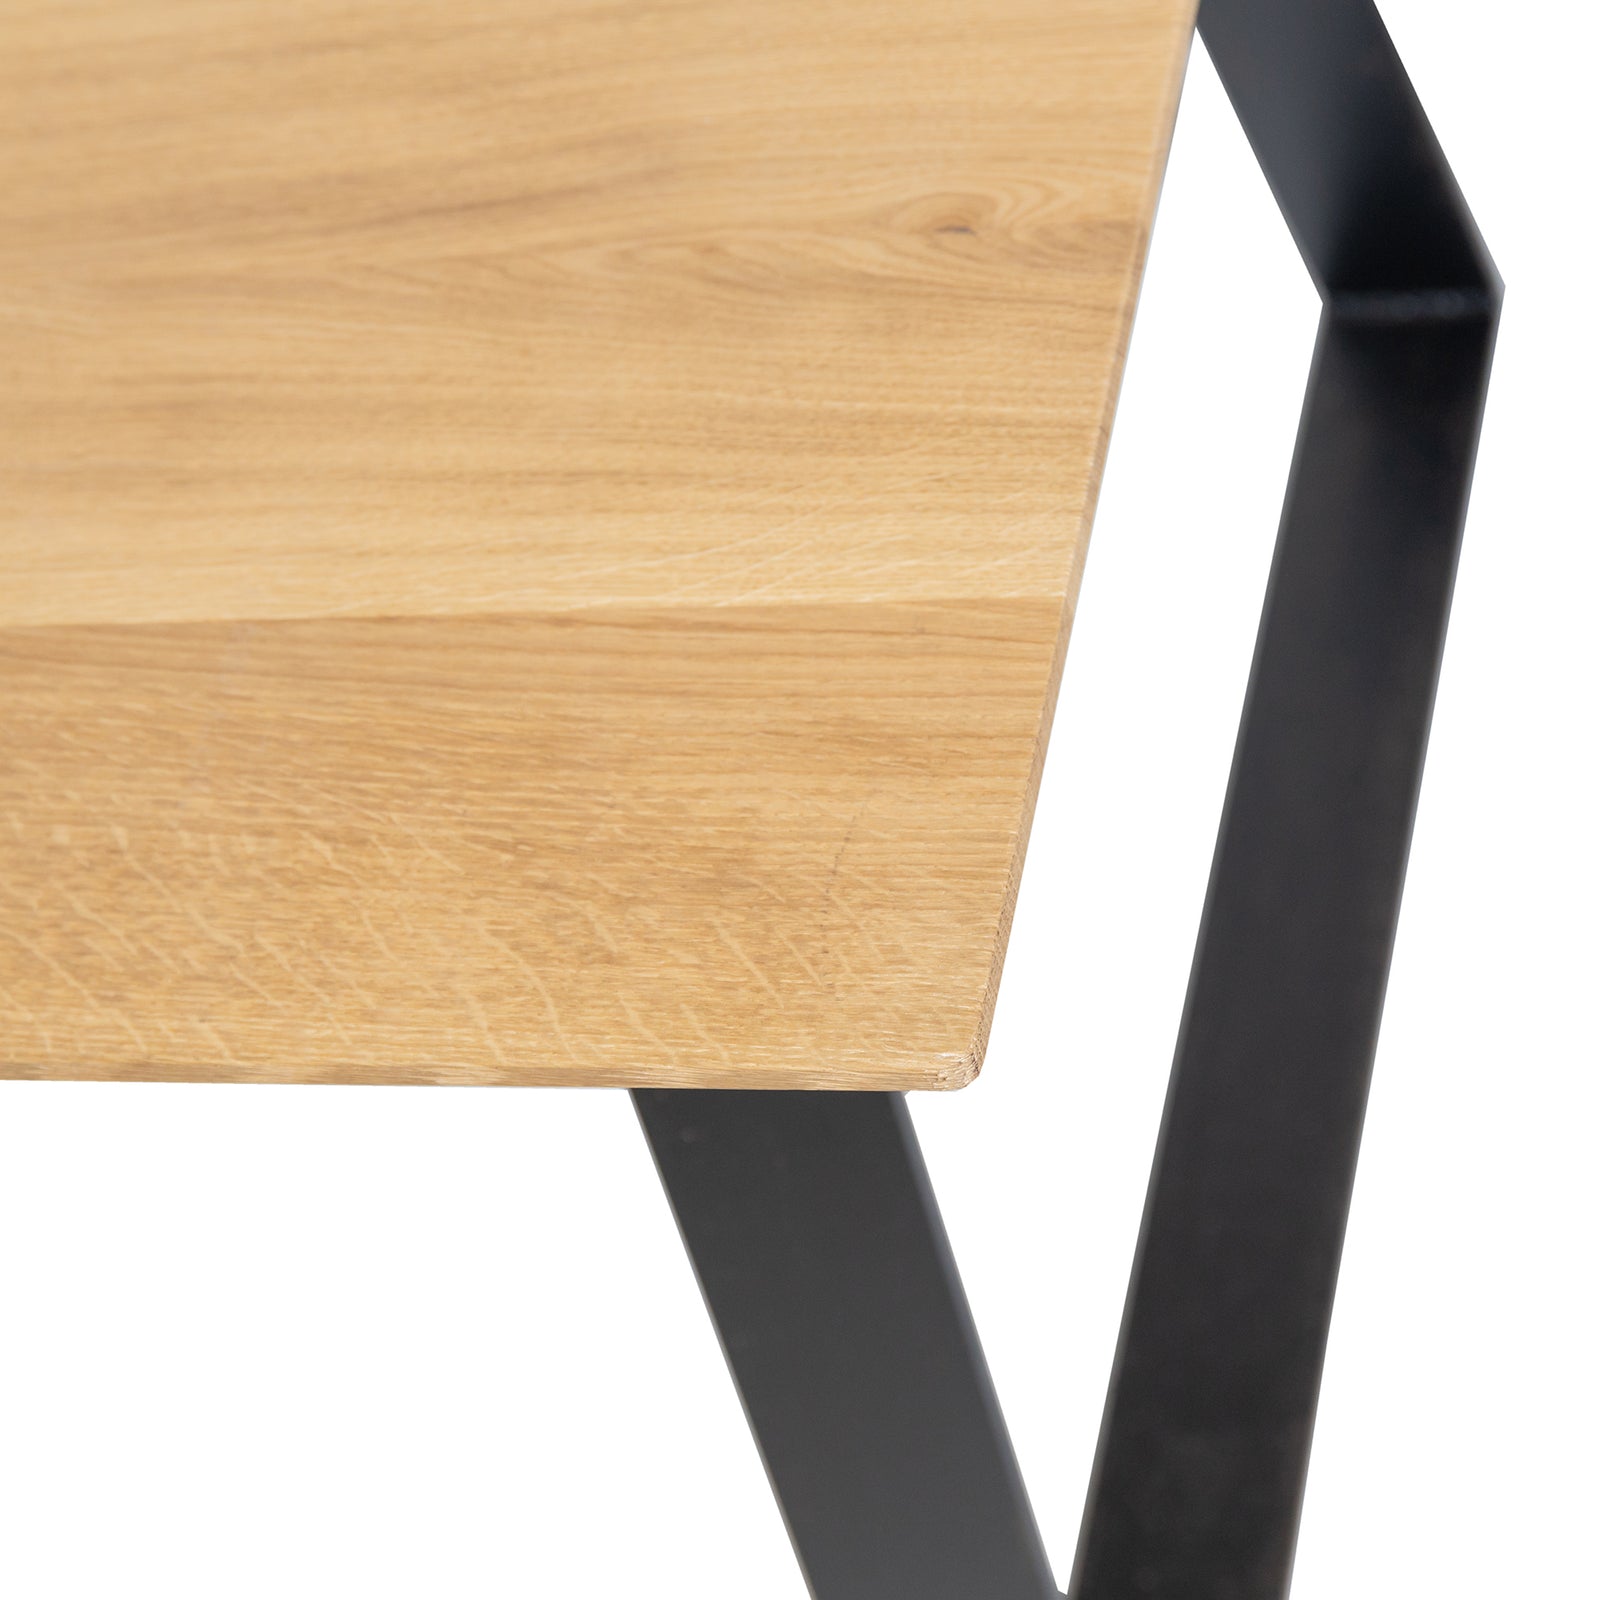 Solid Oak Dining Table Natural / Trapeze Frame Black / Tapered Edges